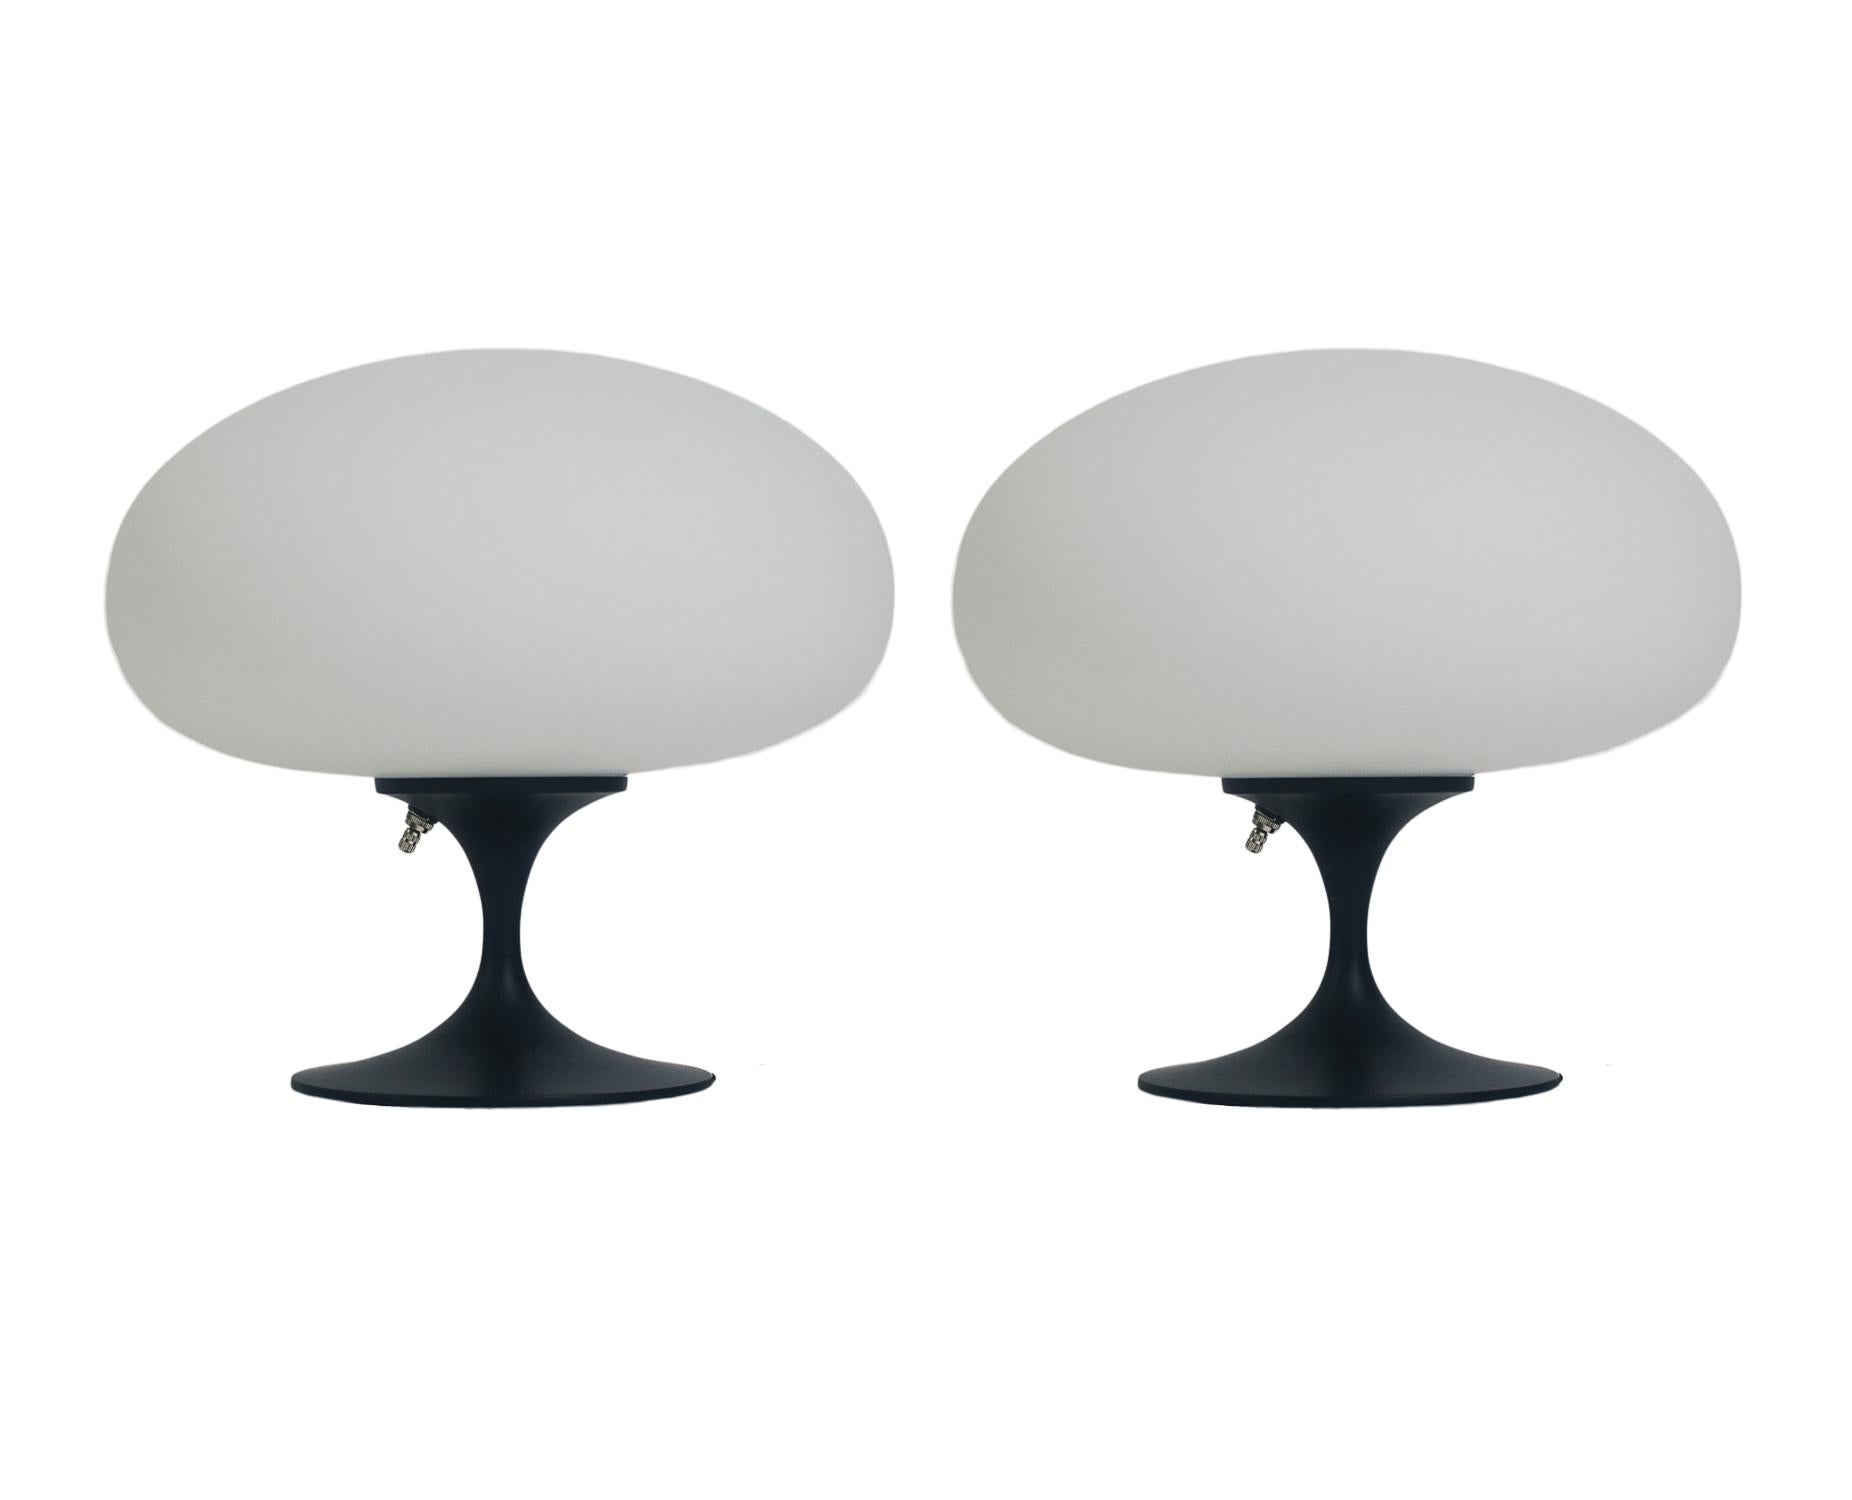 A gorgeous matching pair of tulip form table lamps after Laurel Lamp company. These feature black powder coated cast aluminum bases with mouth blown frosted white glass shades. The price includes the pair as shown.